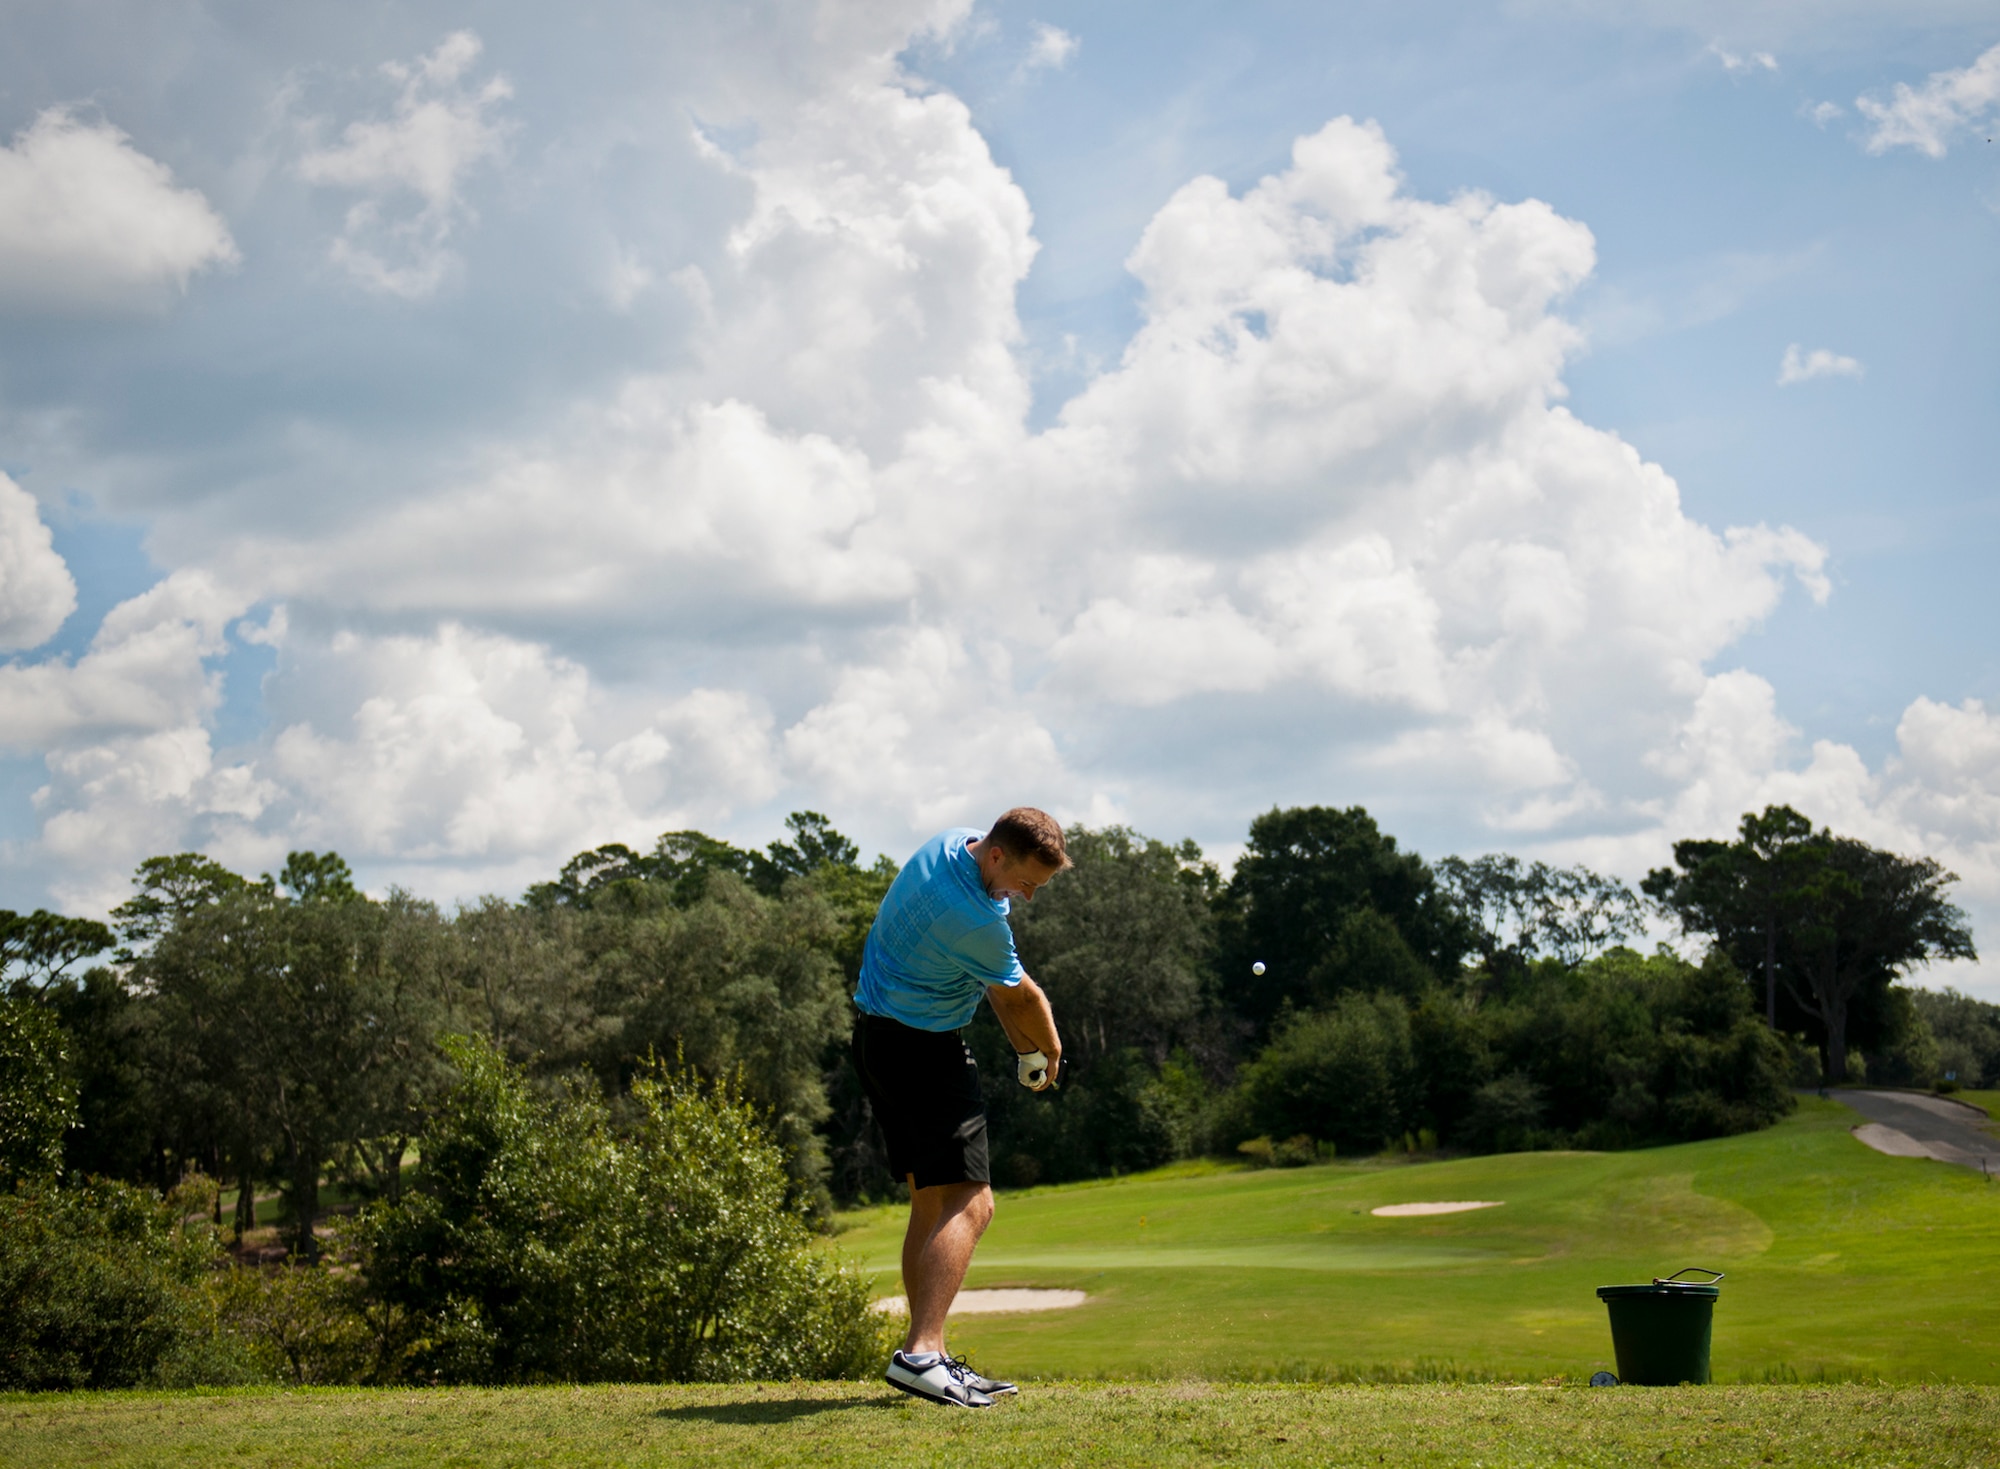 Trevor Bliven, of the 36th Electronic Warfare Squadron, takes a swing at the Par 3 second hole of the base intramural golf championship Aug. 28 at the Eglin Golf Course.  The 36th EWS competed against the 53rd Wing and were tied after 18 holes.  The 36th EWS team won the sudden death playoff on the first hole to claim the championship.  (U.S. Air Force photo/Samuel King Jr.)